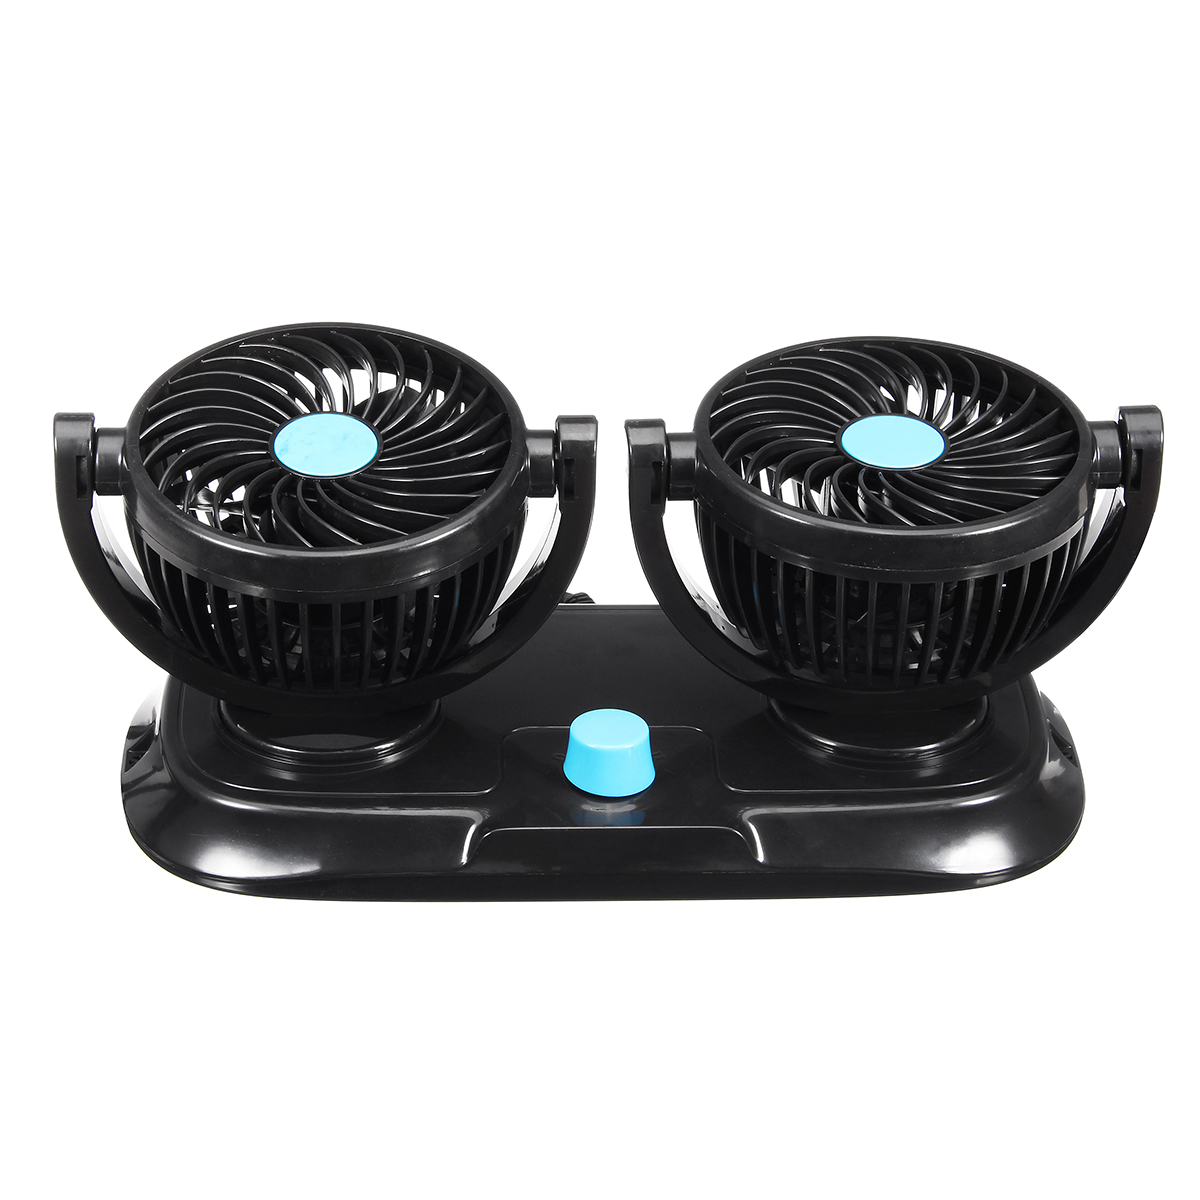 12V-Adjustable-Double-360-Degrees-Mini-Oscillating-Fan-Rotation-Cooling-Fan-Air-Conditioner-1338437-6